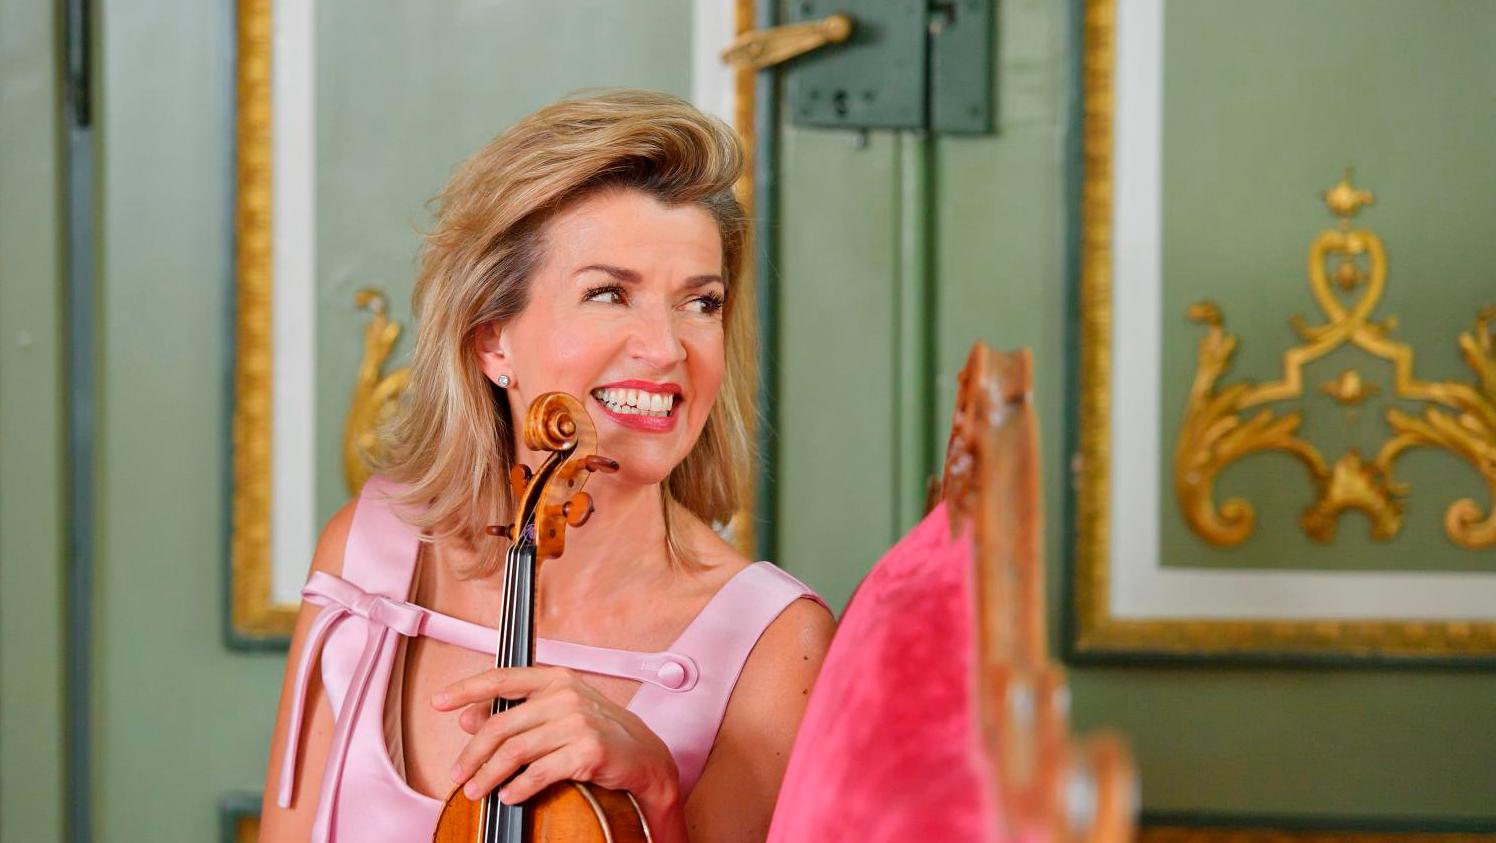   Violin Virtuoso Anne-Sophie Mutter is Fond of Contemporary Art